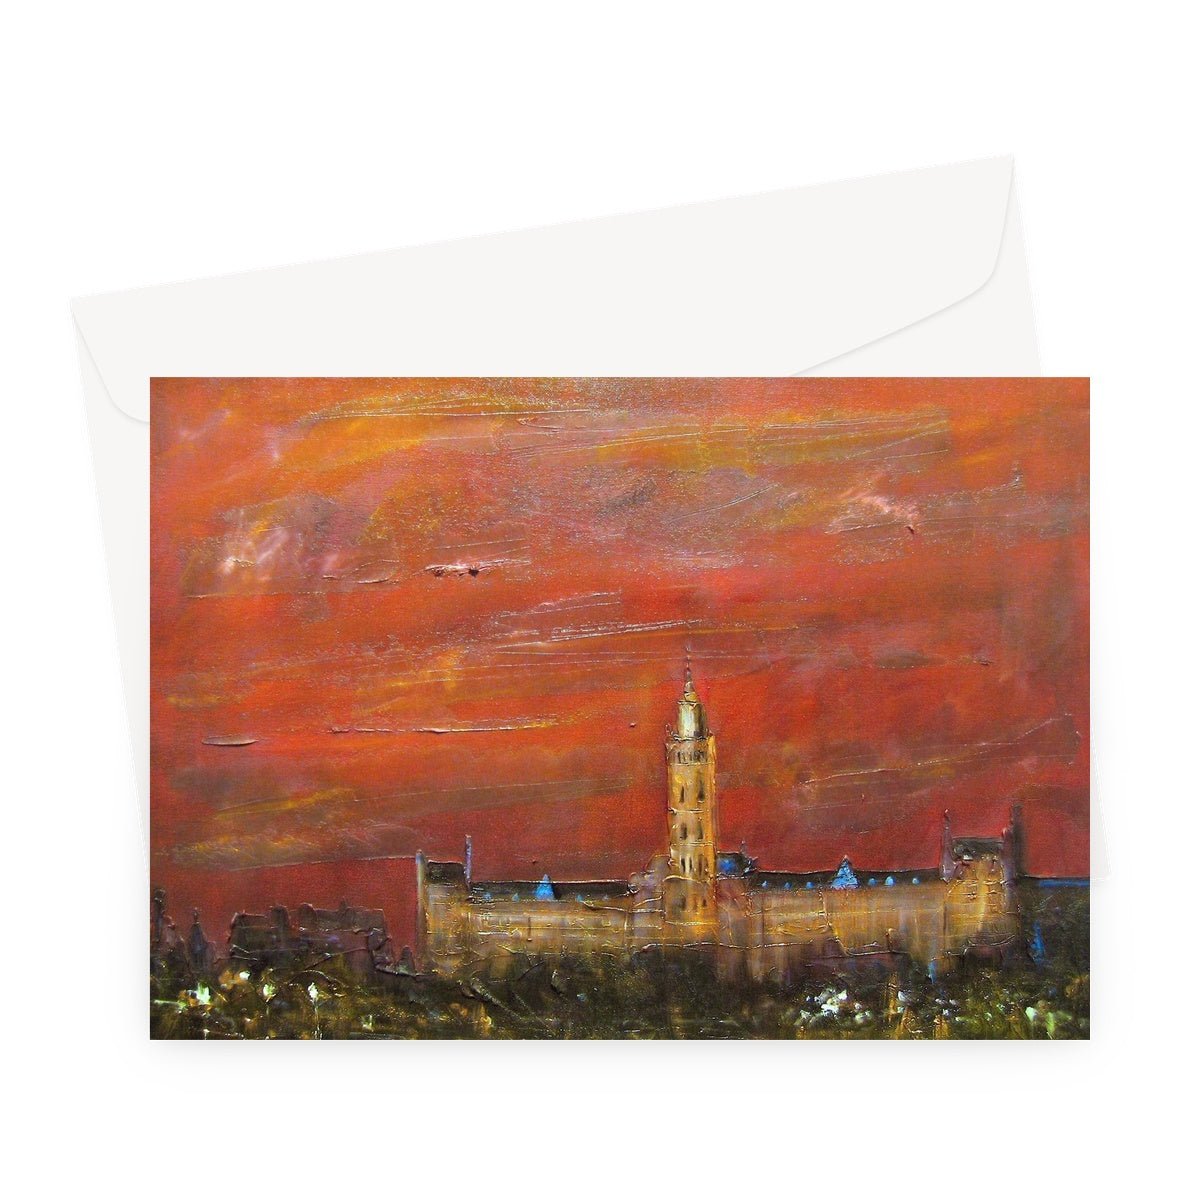 Glasgow University Dusk Art Gifts Greeting Card-Greetings Cards-Edinburgh & Glasgow Art Gallery-A5 Landscape-1 Card-Paintings, Prints, Homeware, Art Gifts From Scotland By Scottish Artist Kevin Hunter